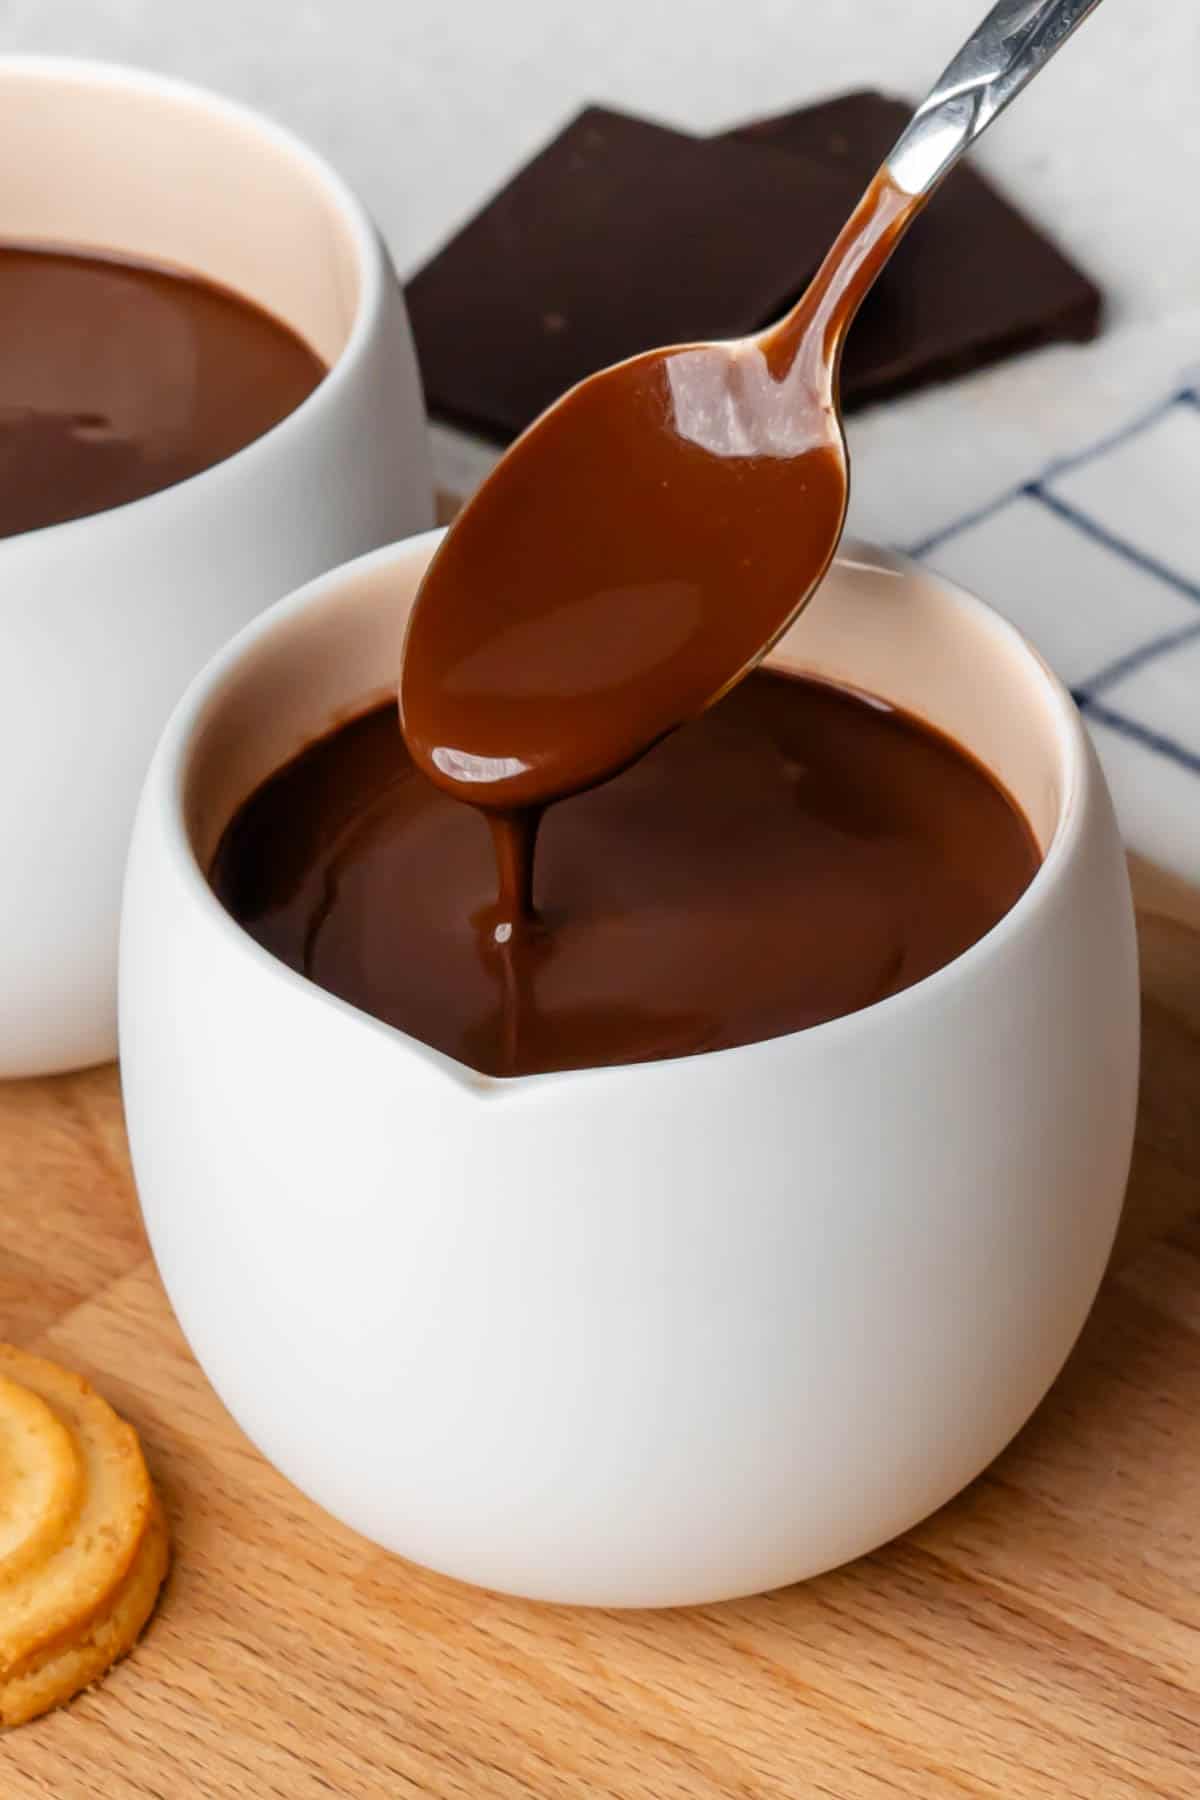 Spoon of Italian Hot Chocolate being lifted out of a mug